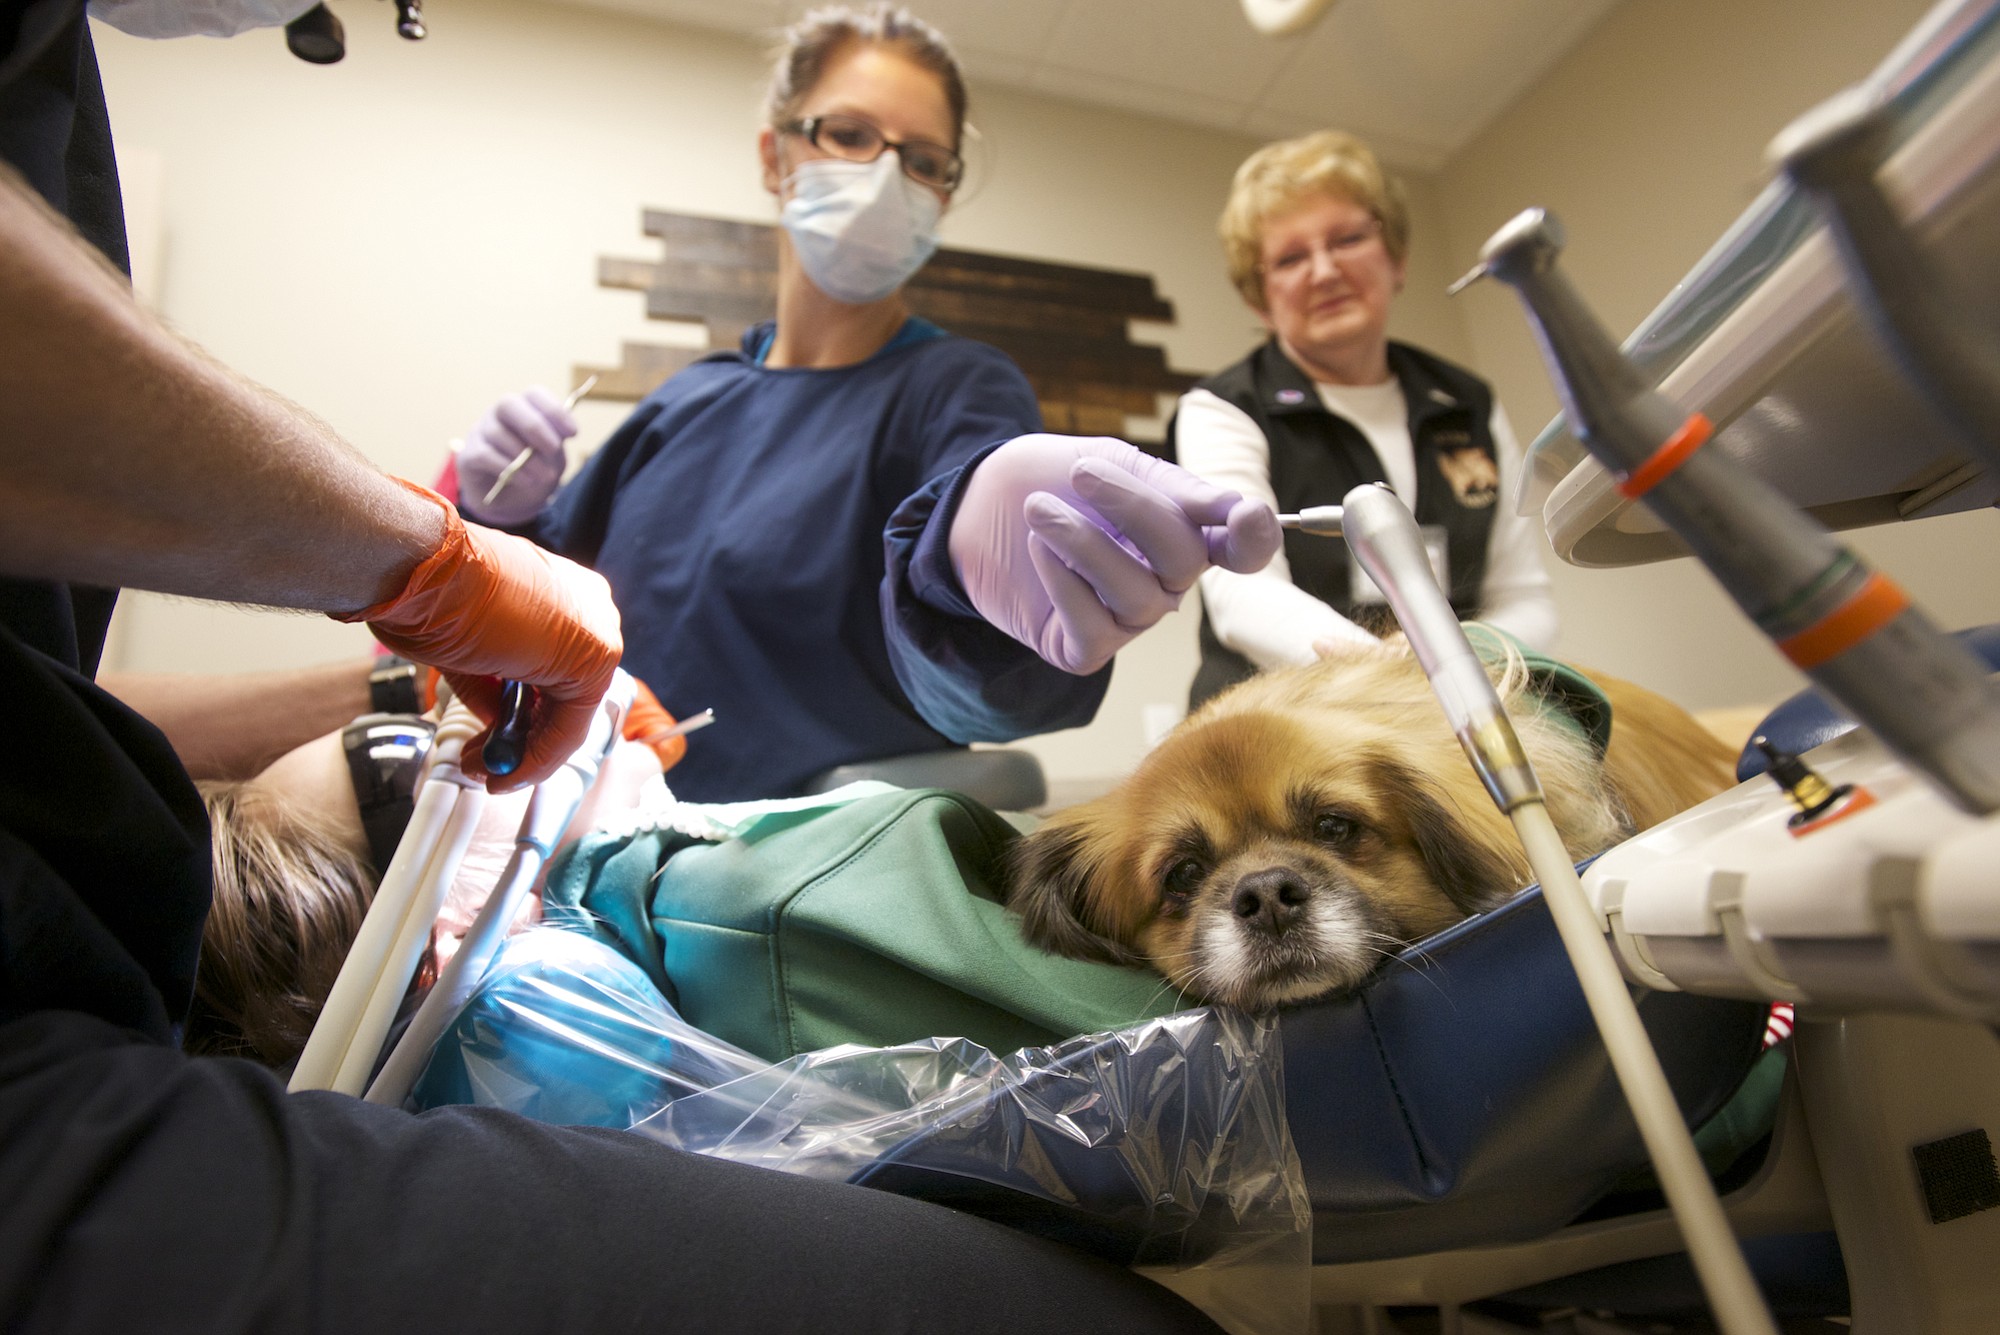 Therapy dog Kyi, a 6-year-old Tibetan spaniel, lies on the lap of 10-year-old Baylee Polzen during a dental procedure at Adventure Dental in Salmon Creek on Nov. 26.